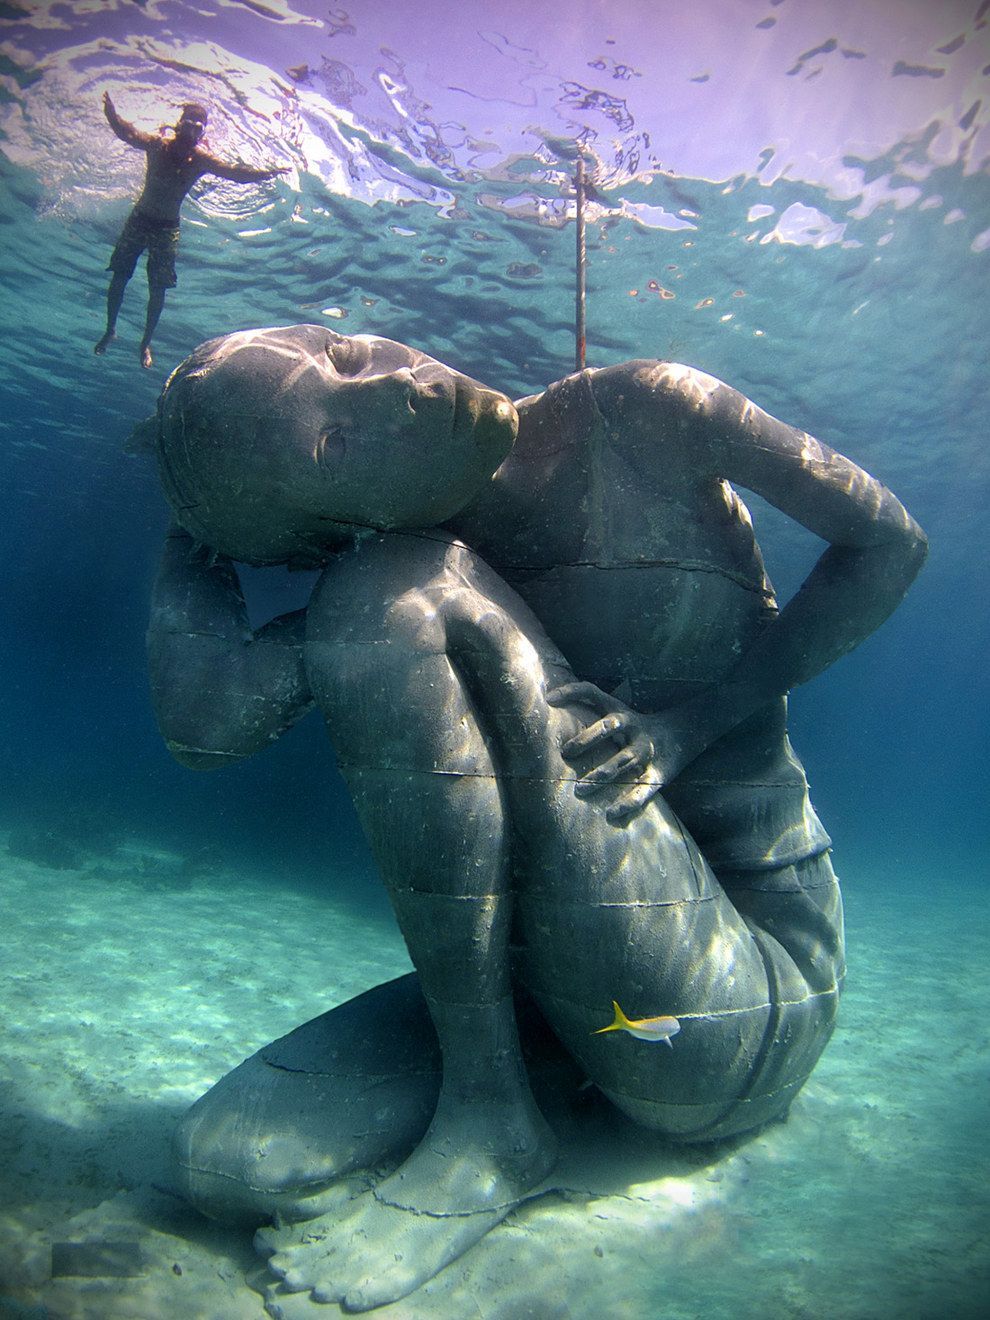 This stunning 18-feet-tall, 60-ton underwater sculpture of Bahamian girl carrying the weight of the ocean